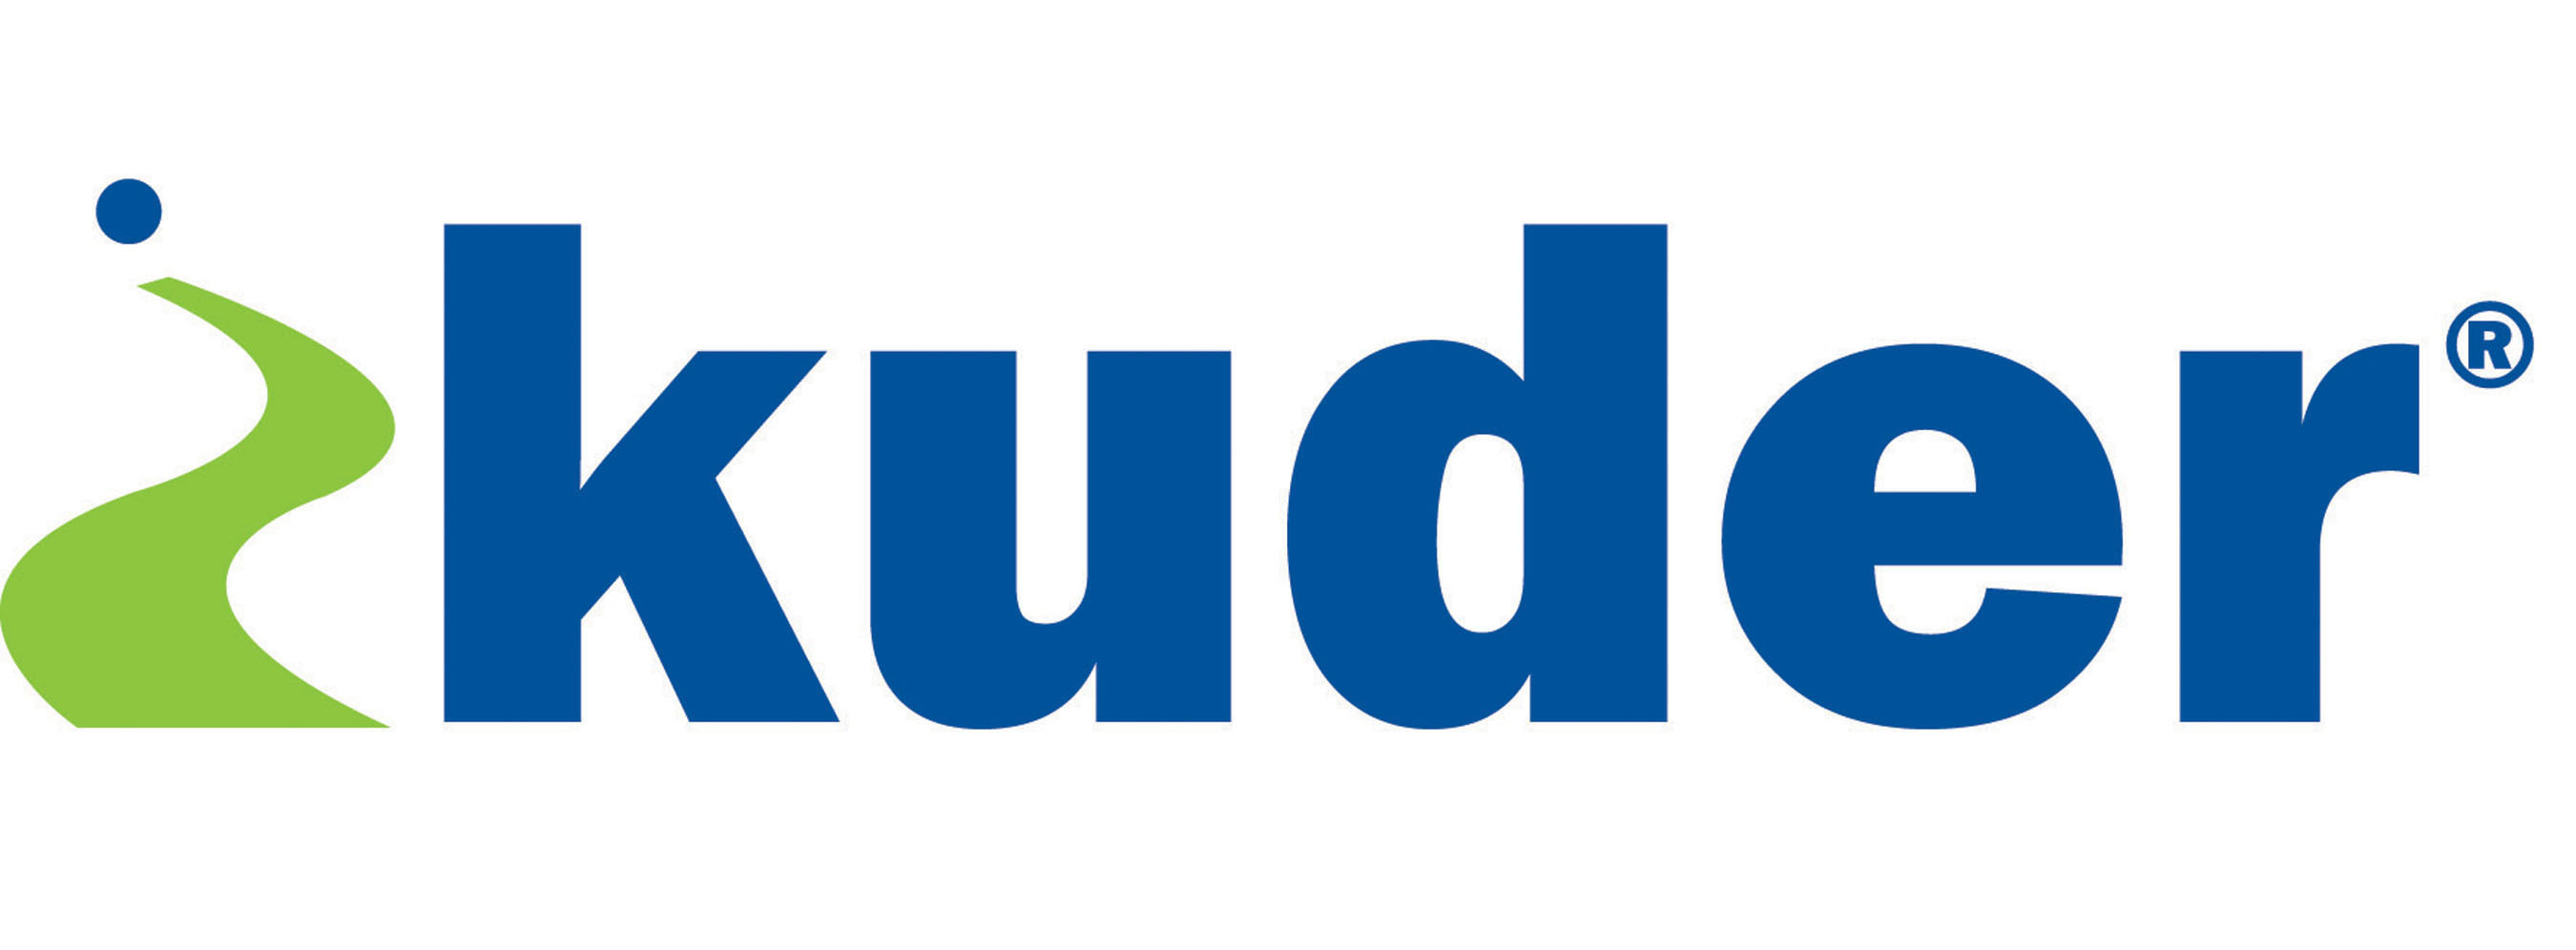 Kuder, Inc. is a leading provider of Internet-based tools and resources that help students and adults achieve their educational and career planning goals. Our mission is to raise student aspirations and to provide career options to students and adults through self-assessment and education. Visit www.kuder.com for more information or call 800-314-8972.